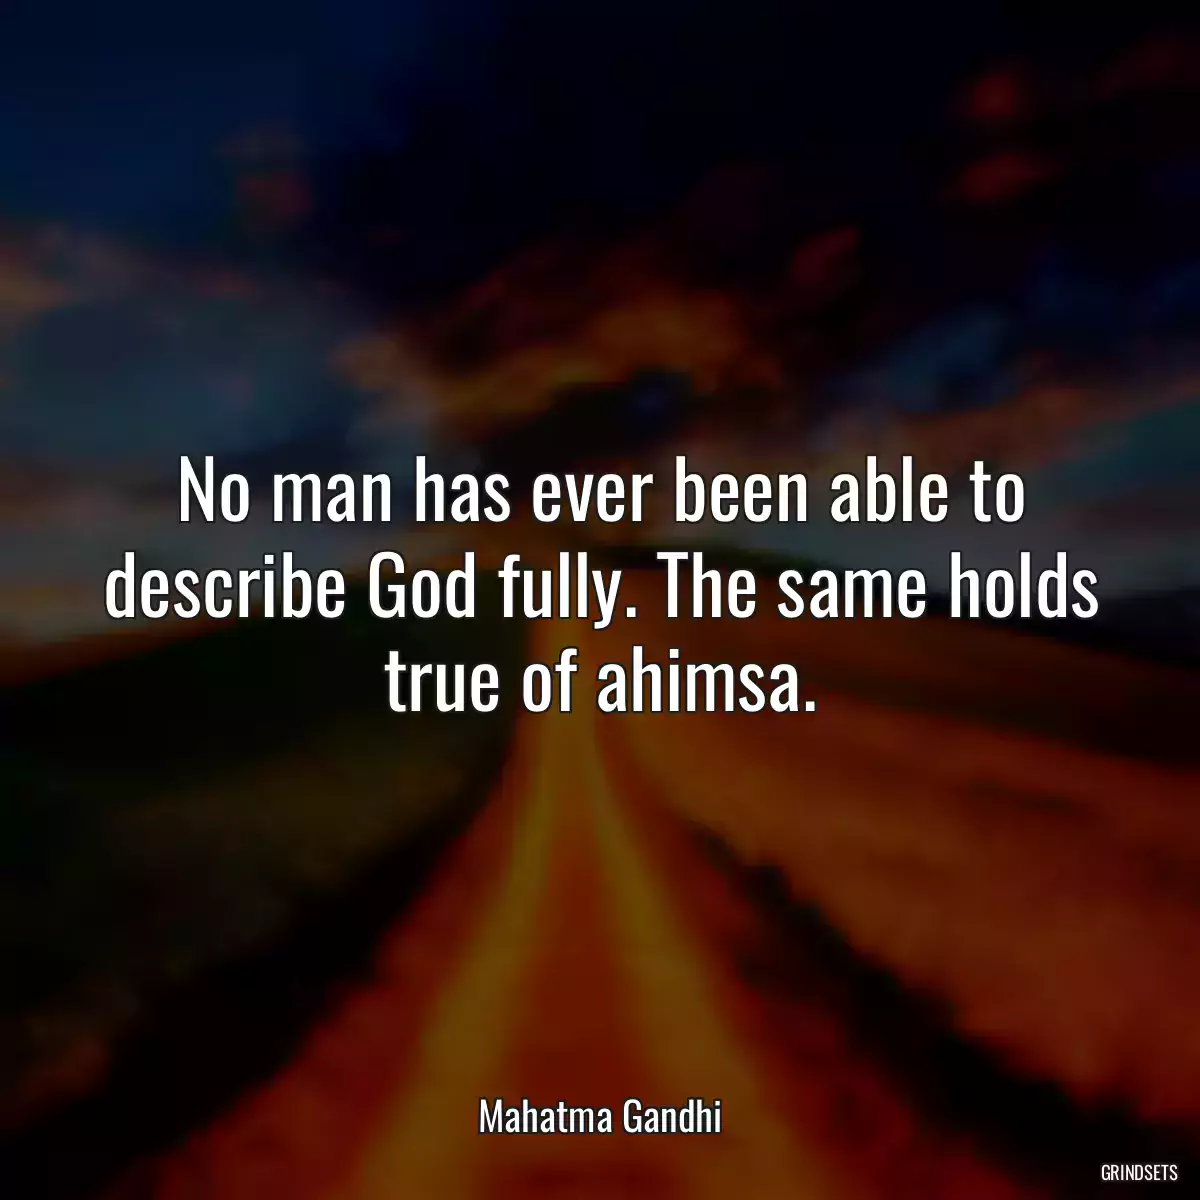 No man has ever been able to describe God fully. The same holds true of ahimsa.